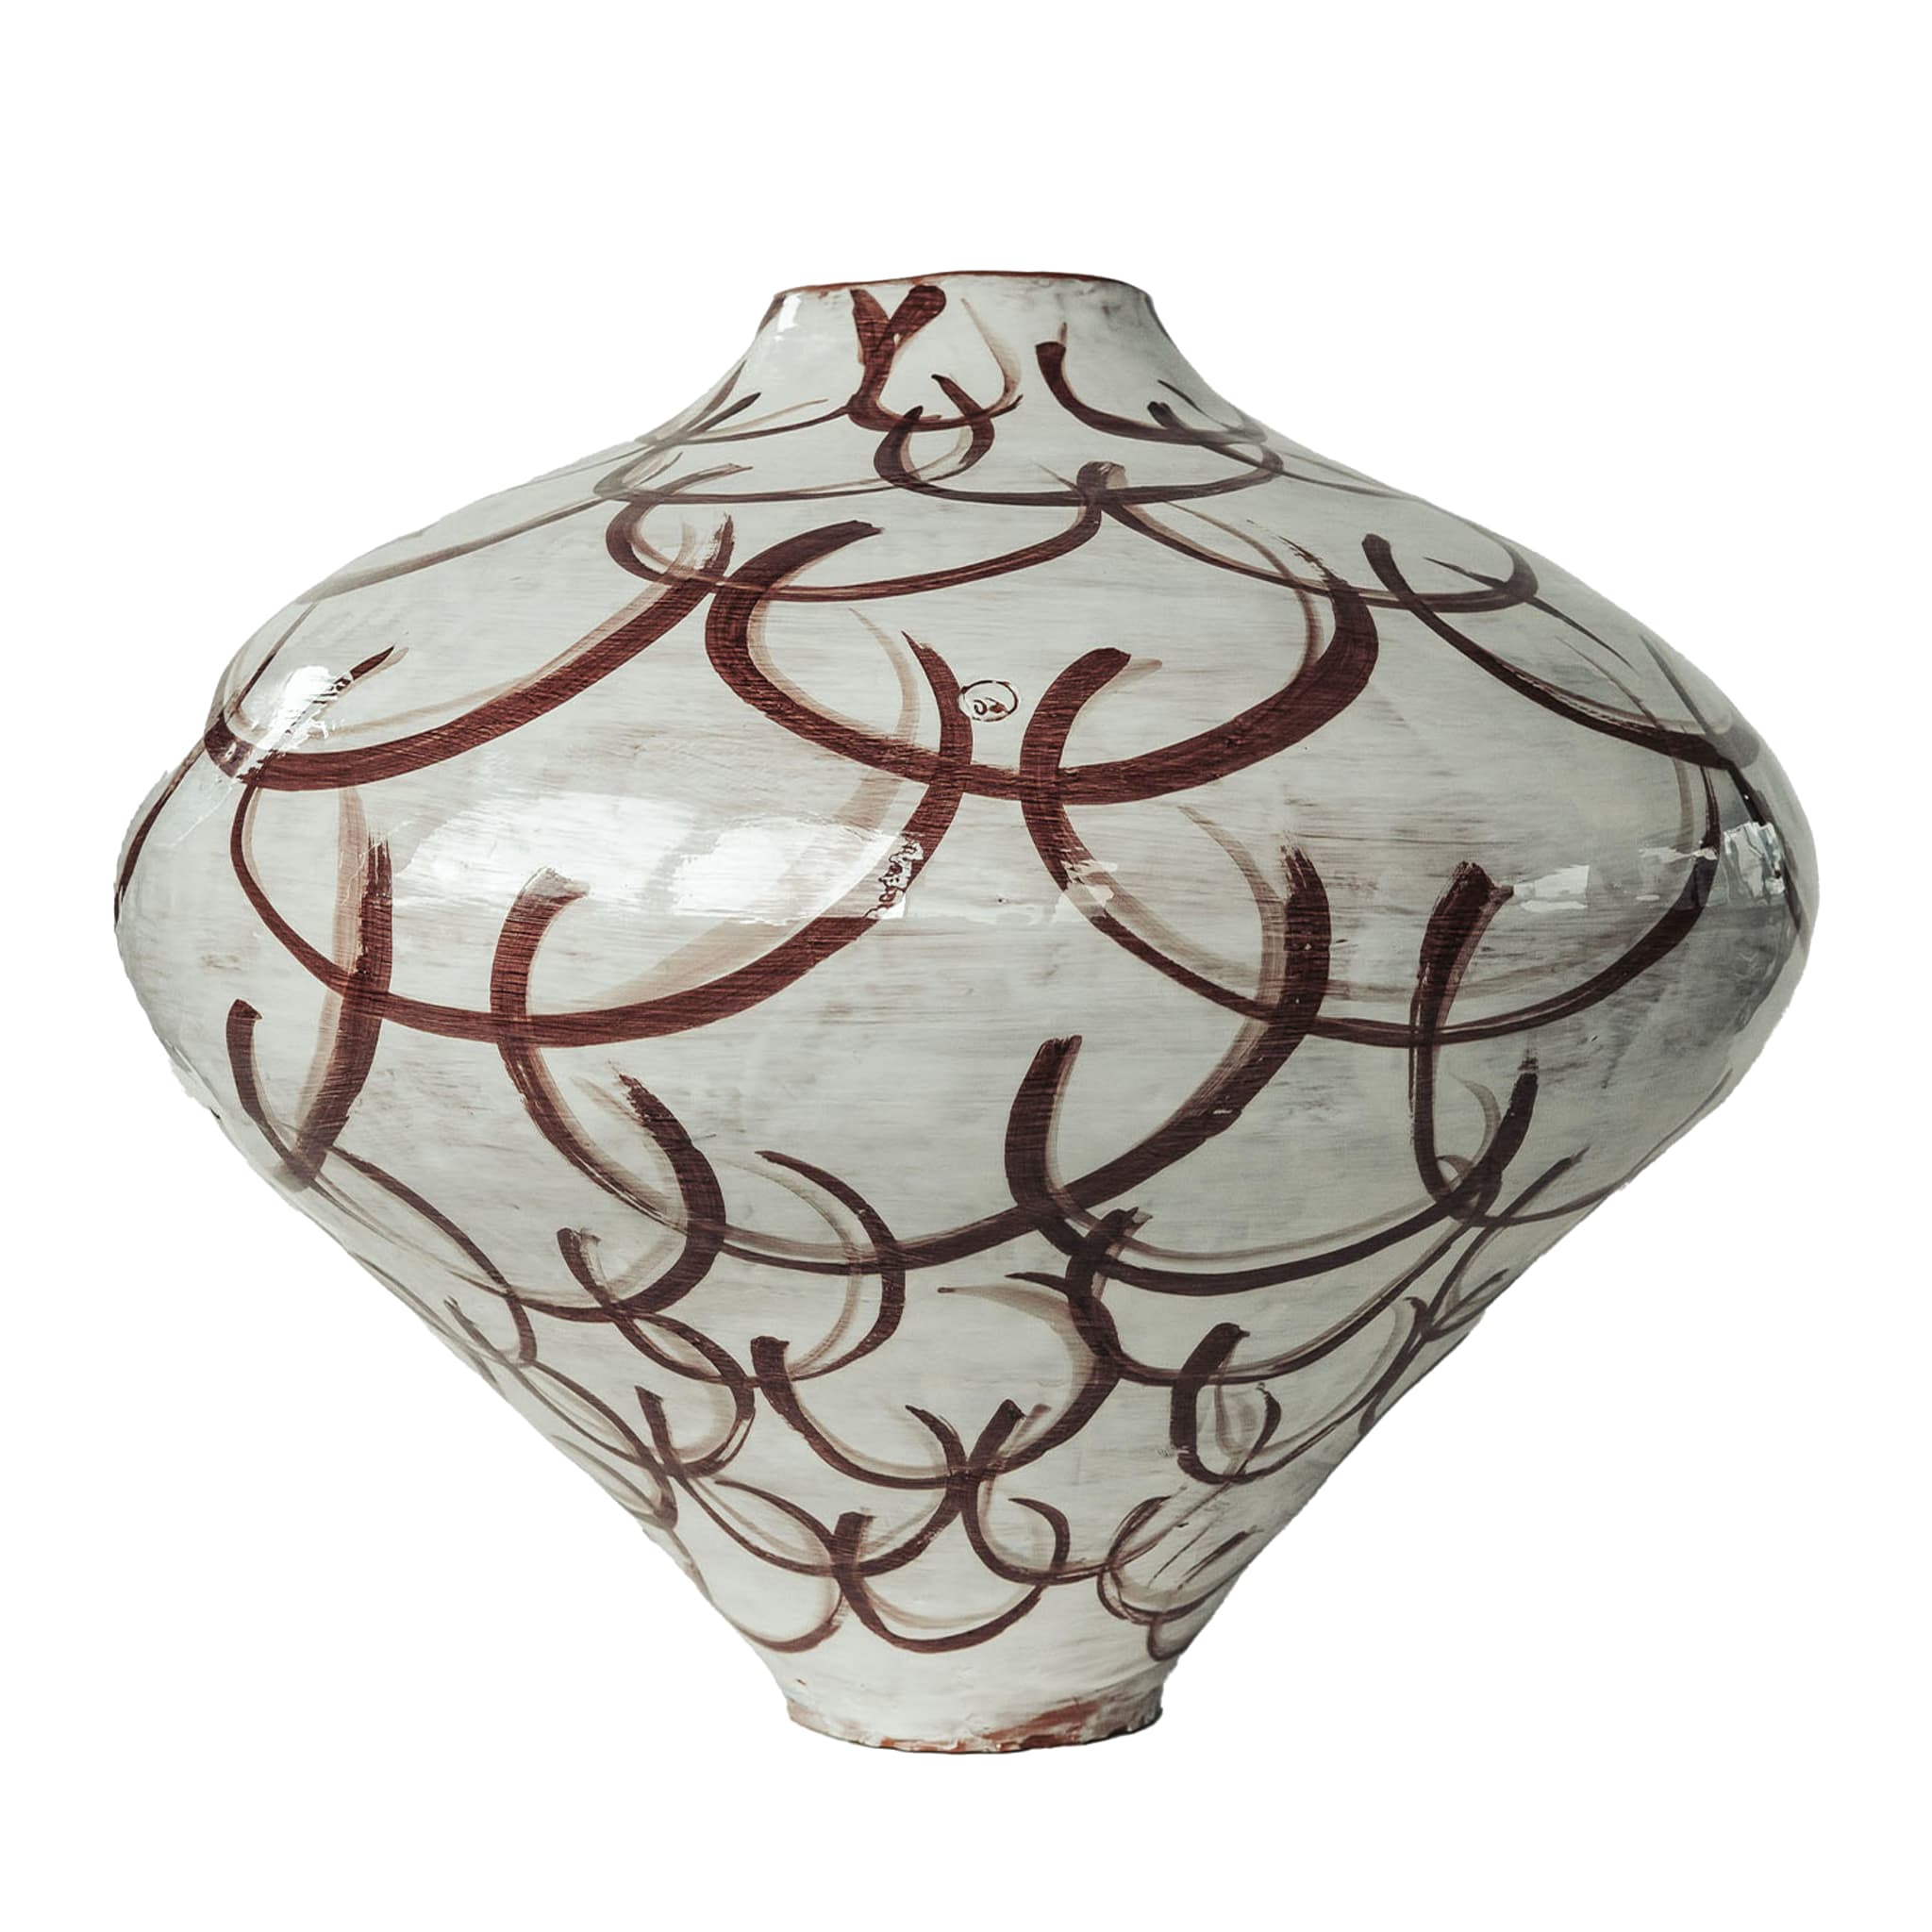 Glass and Ceramic Vases from the finest Italian artisans